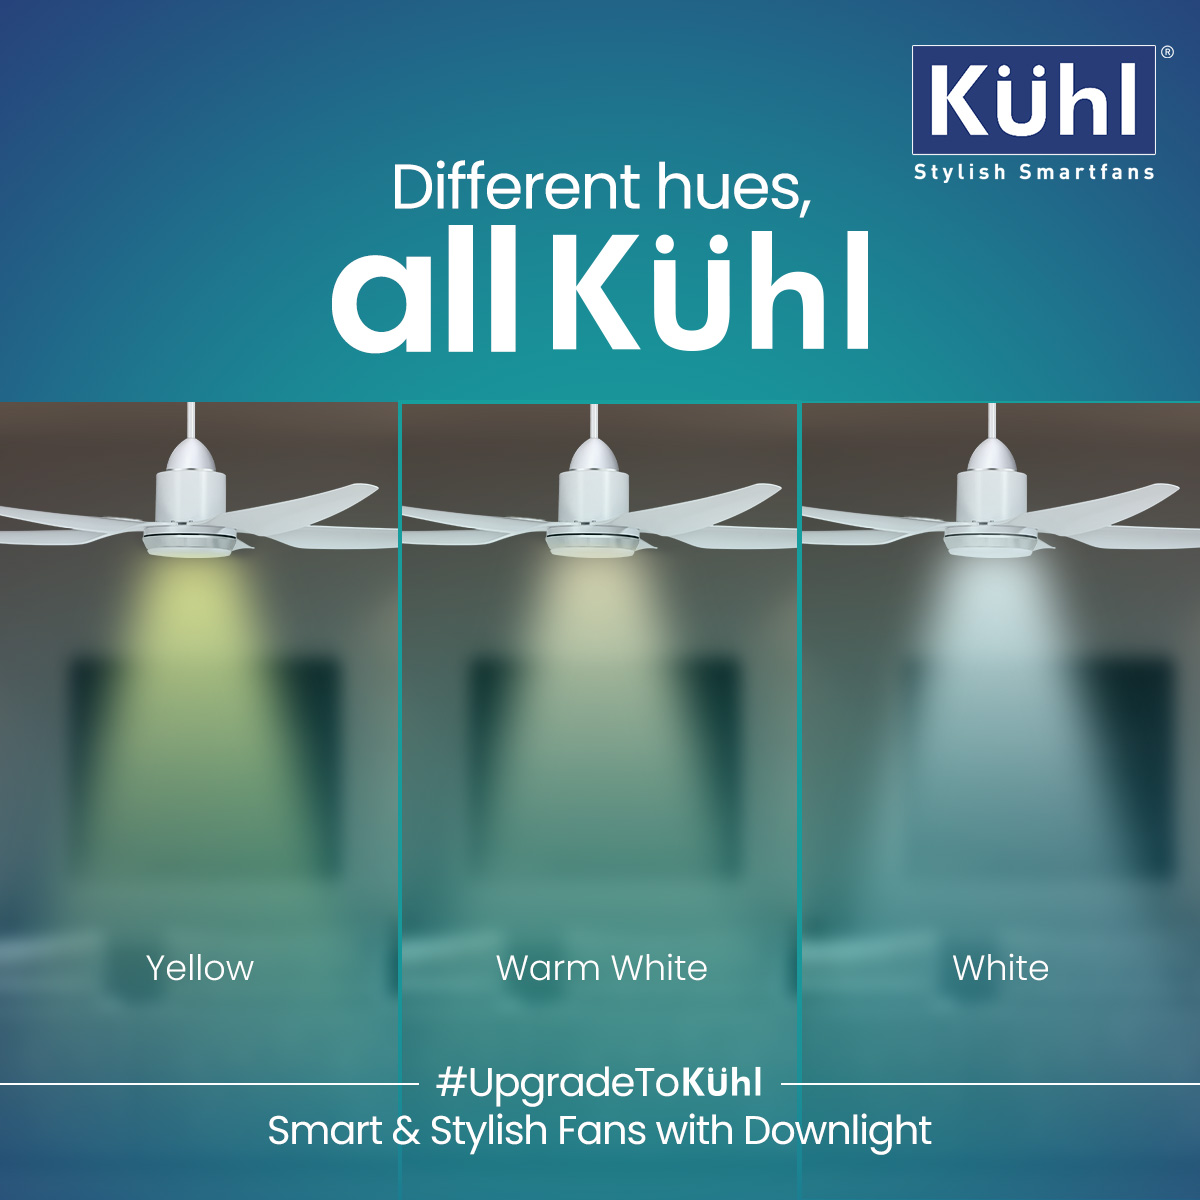 Different shades, all stylish.
 
#UpgradeToKühl and elevate your modern home décor. It comes with a downlight in three shades – Yellow, Warm White, and White.

.
.
.
.
#Kühl #HomeInteriors #RoomDecor #DecorInspiration #BLDCFans #FanWithLights #ModernInteriors #ModernHome